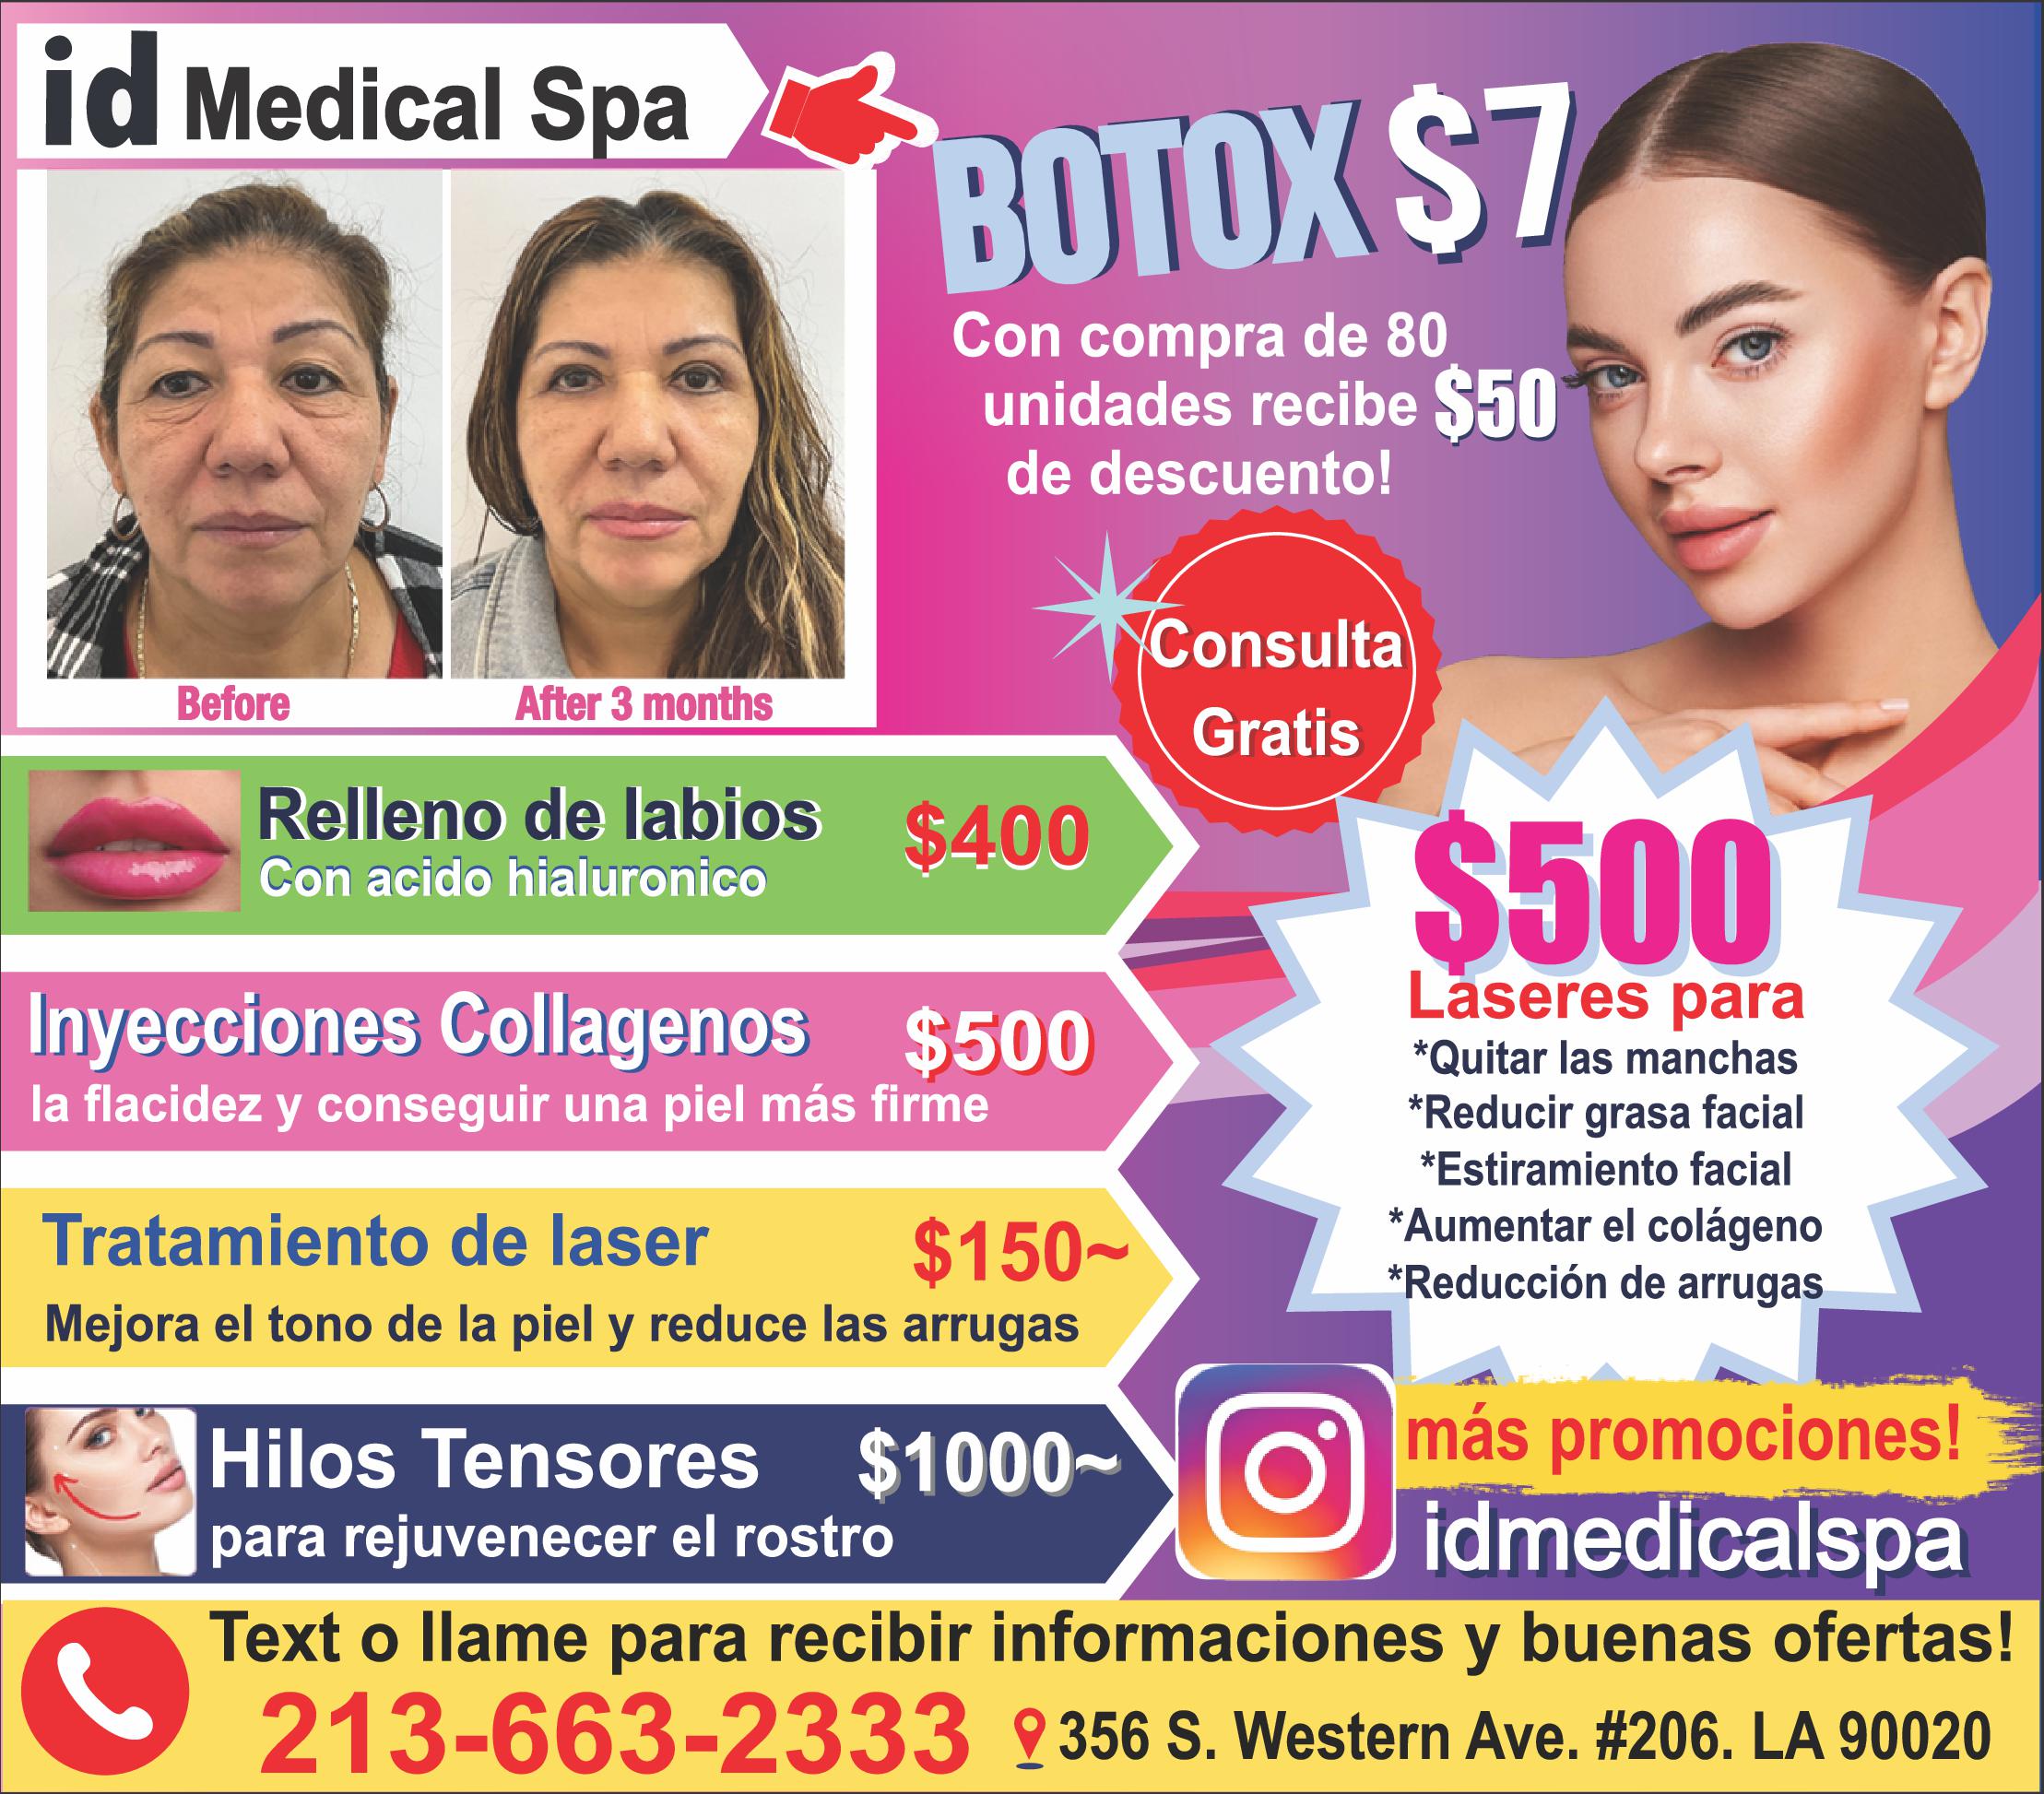 Why Women Medical Id Med Spa